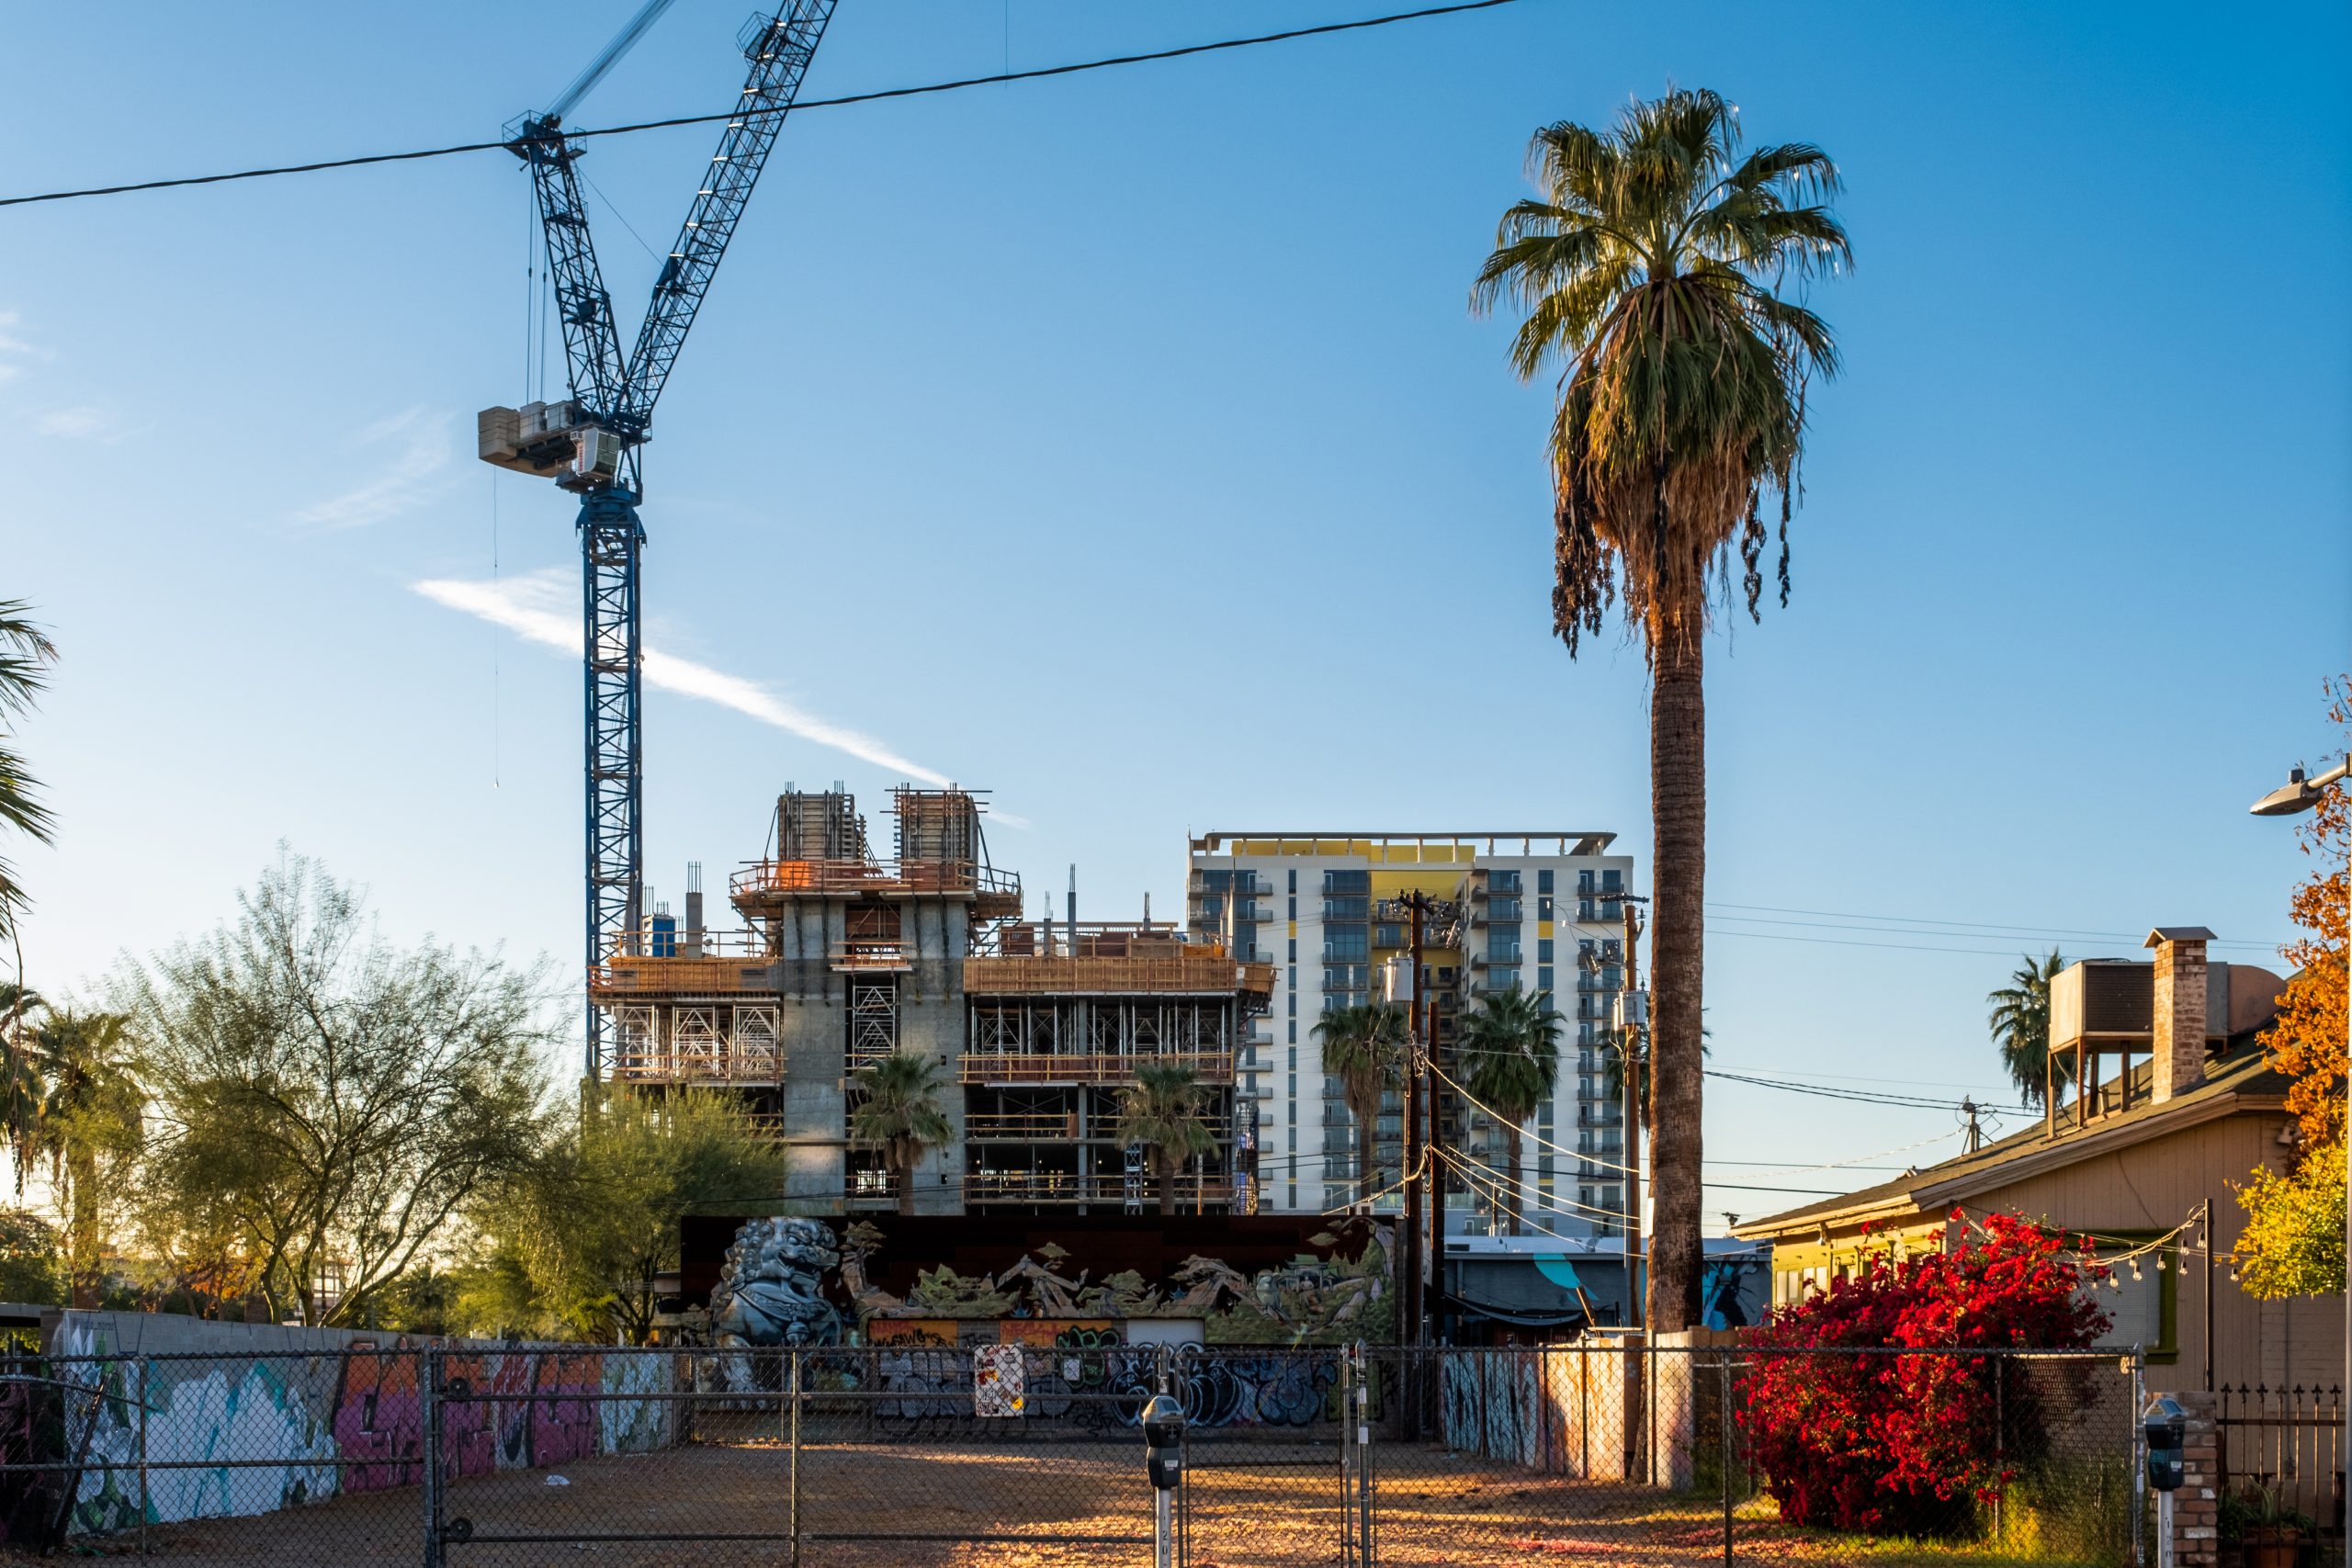 Photograph of construction in downtown Phoenix.